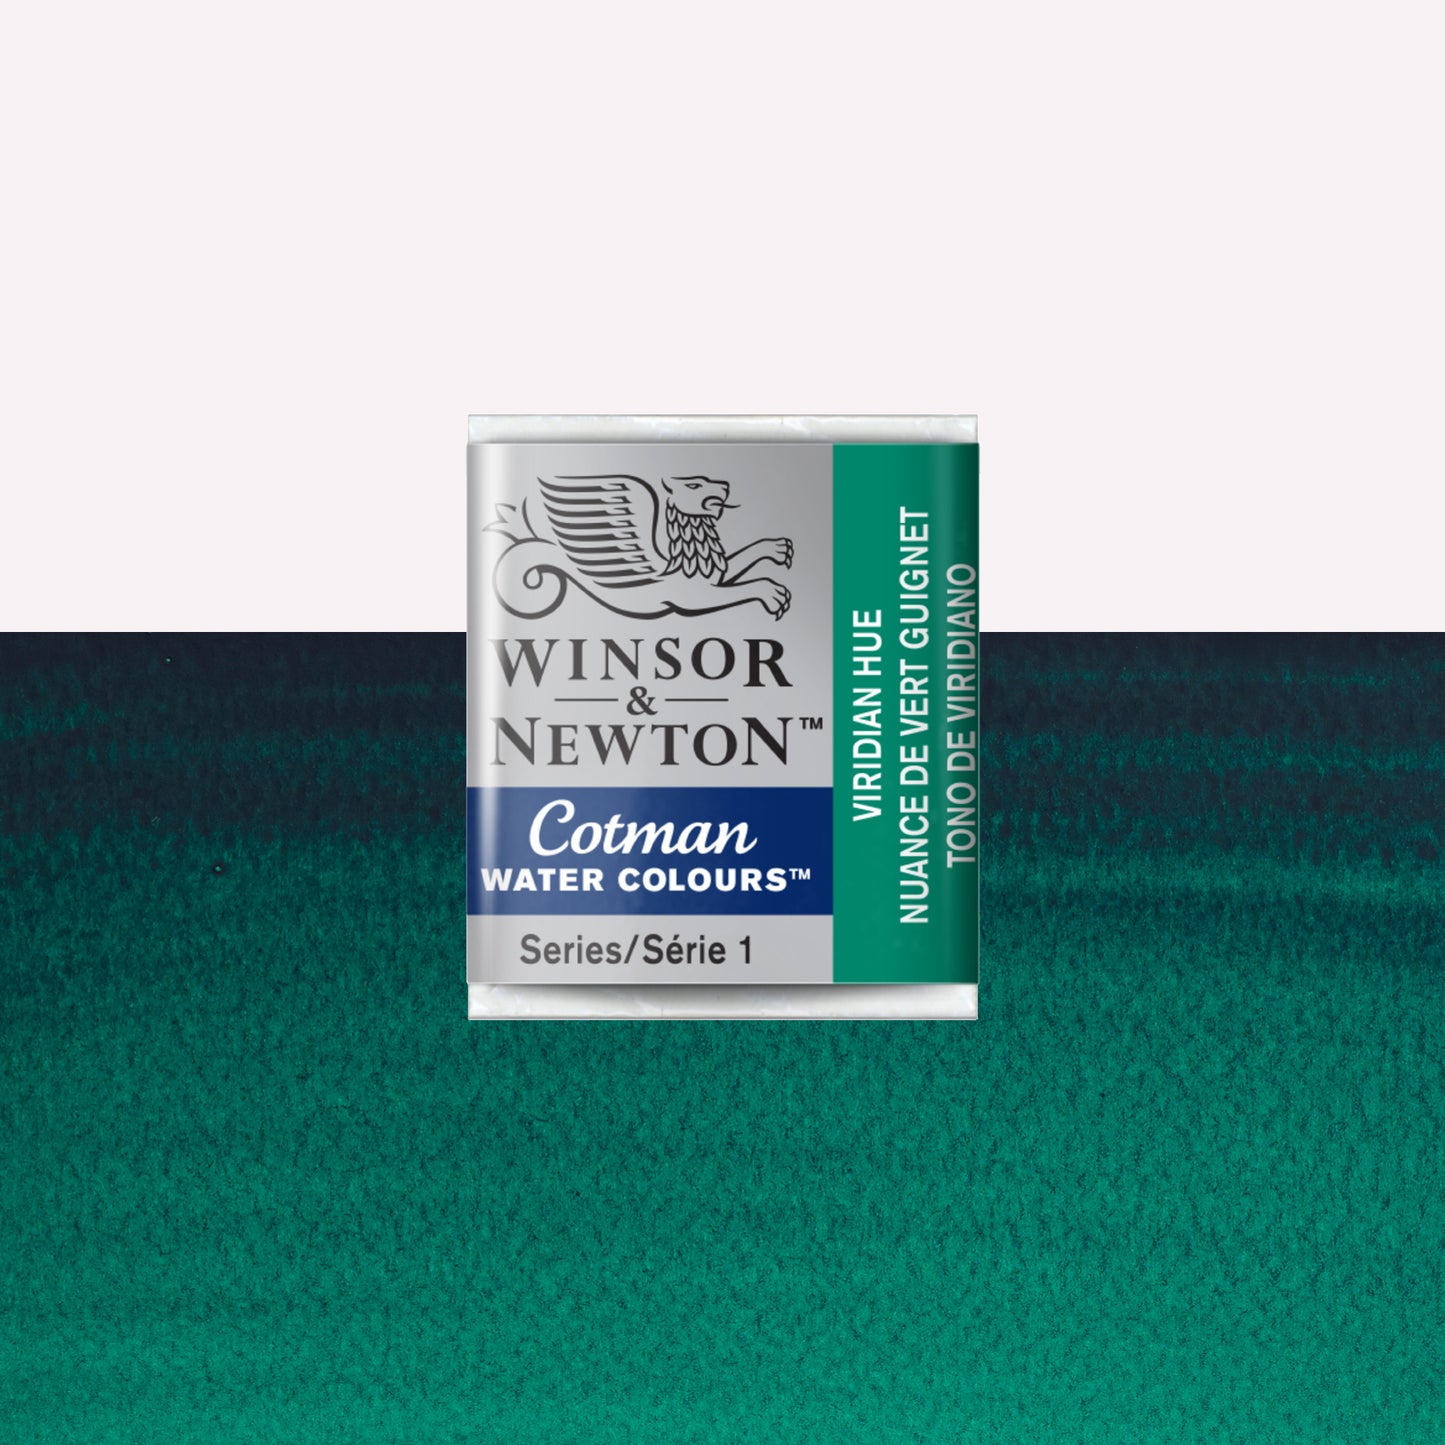 Winsor & Newton Cotman watercolour half pan in the shade Viridian Hue over a vibrant colour swatch. These half pans have a solid formula and are packaged in compressed paint cake. 